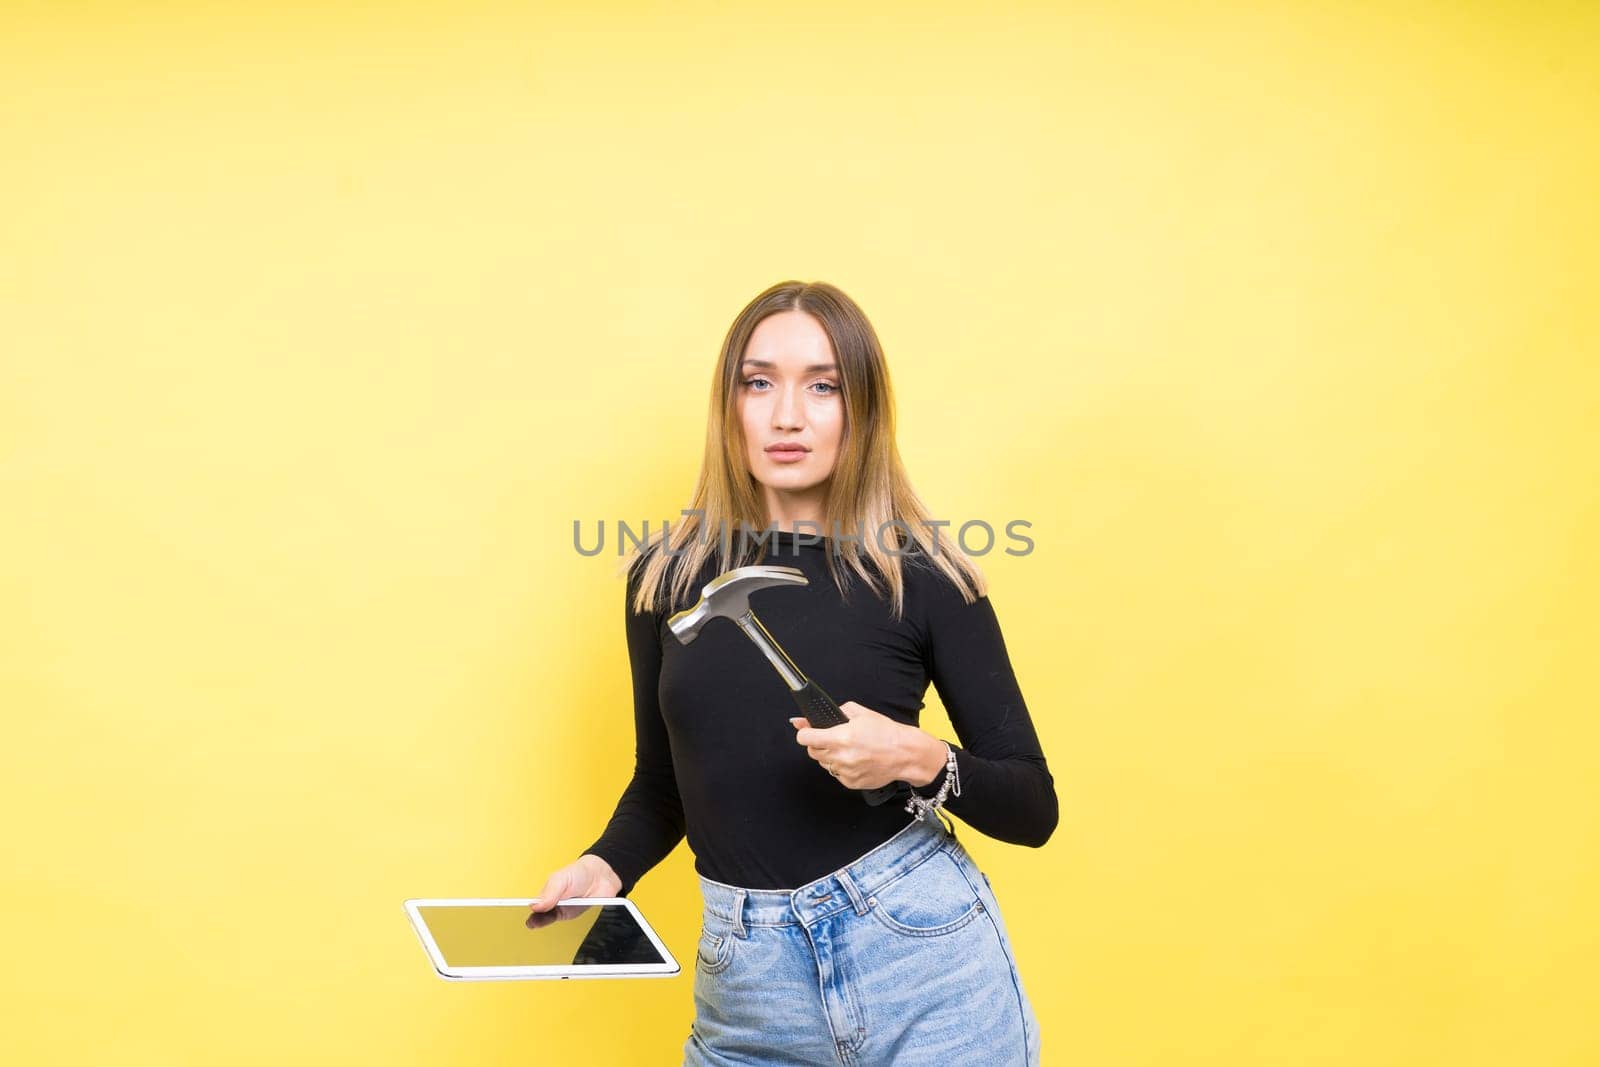 Attractive blond hair woman wearing business suit in front of a computer holding a hammer by Zelenin